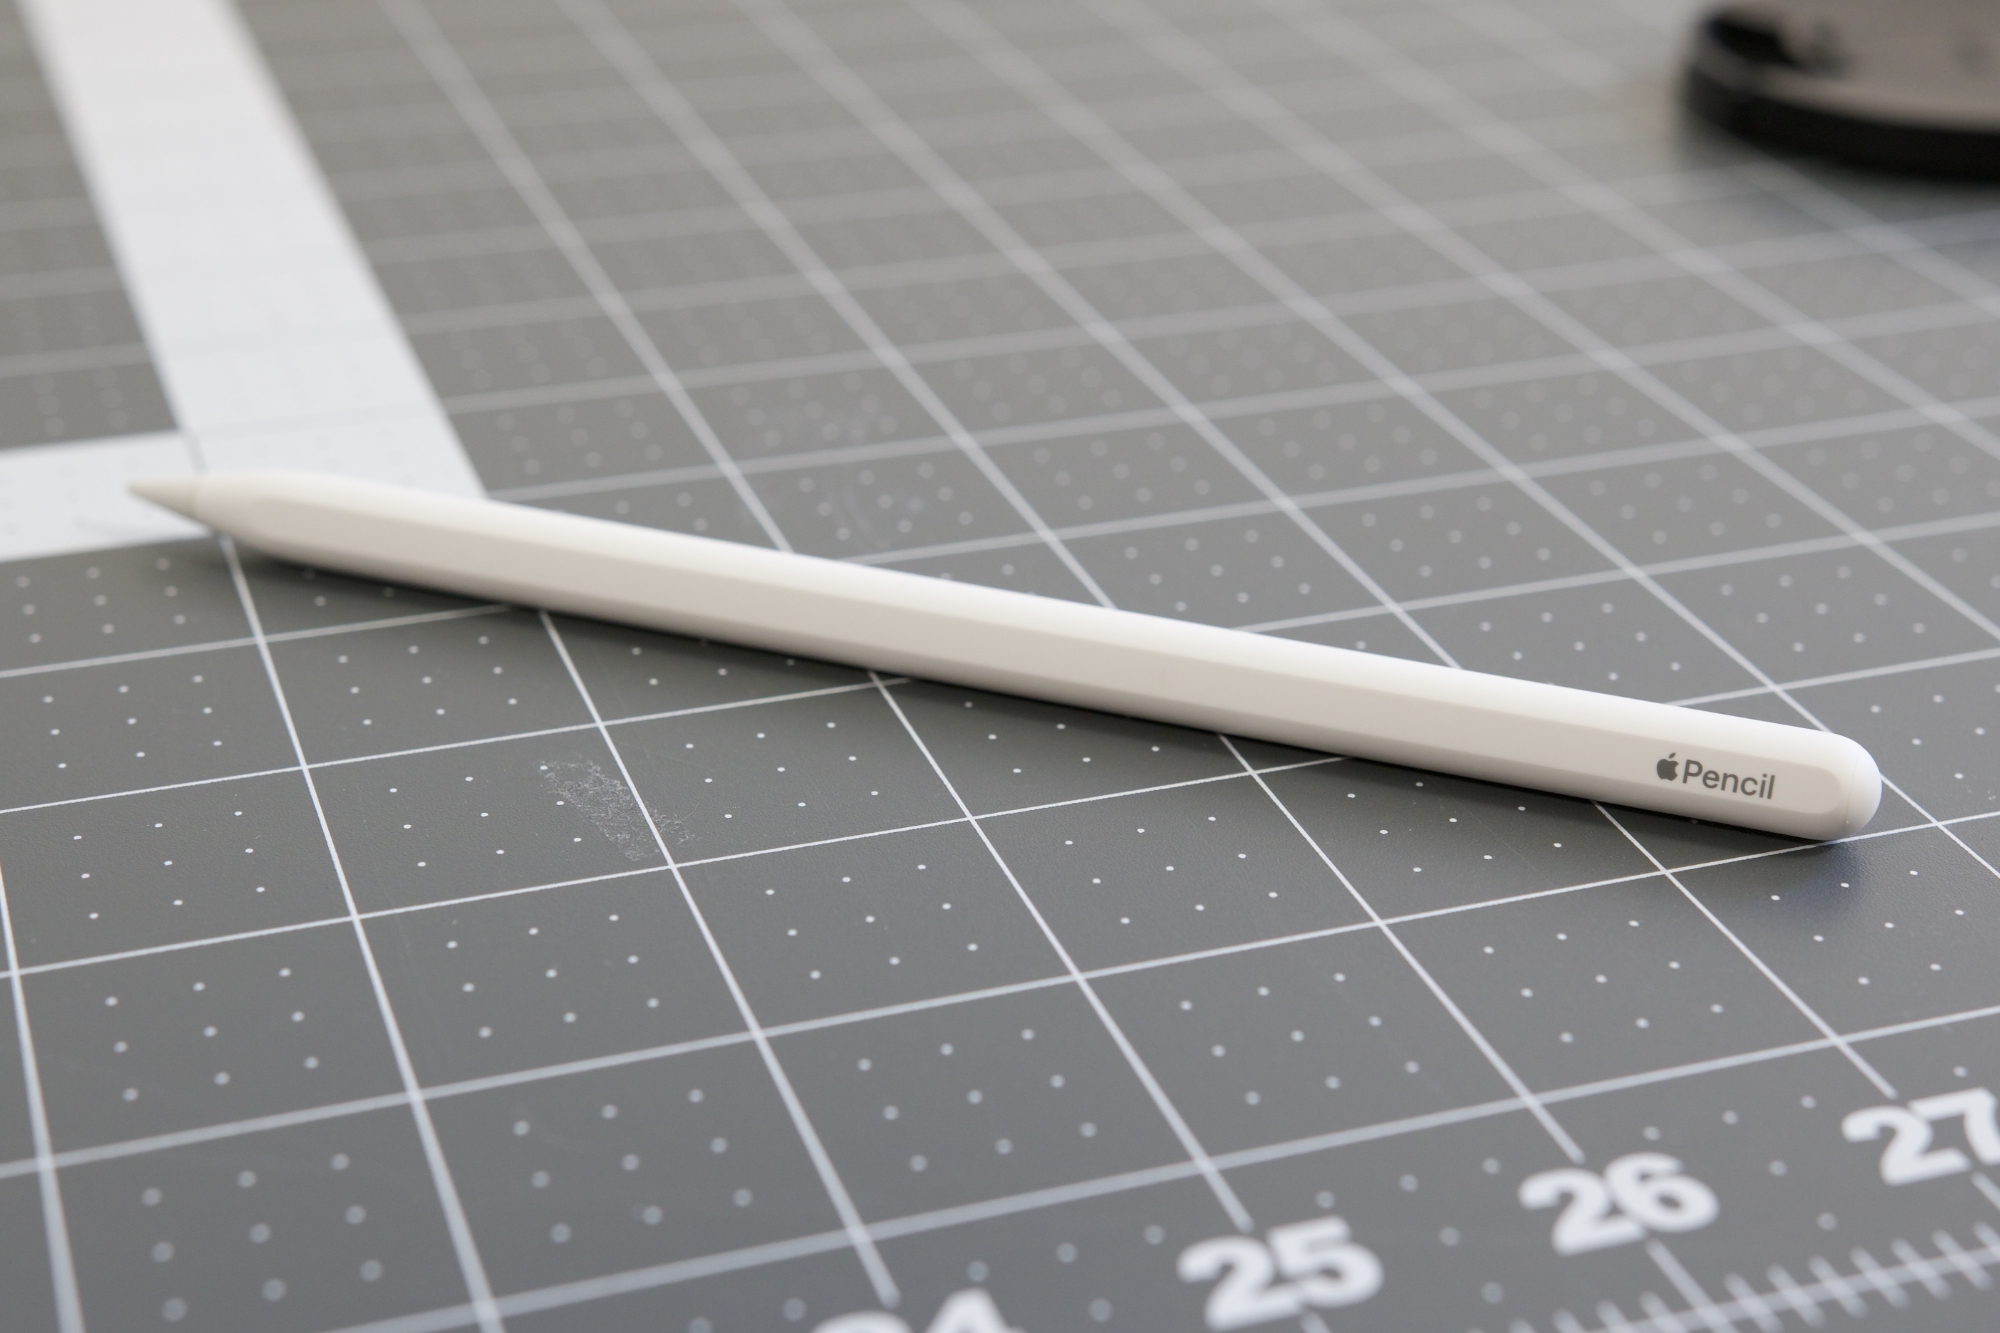 Apple Pencil 1 vs. 2: Which generation suits your iPad better?